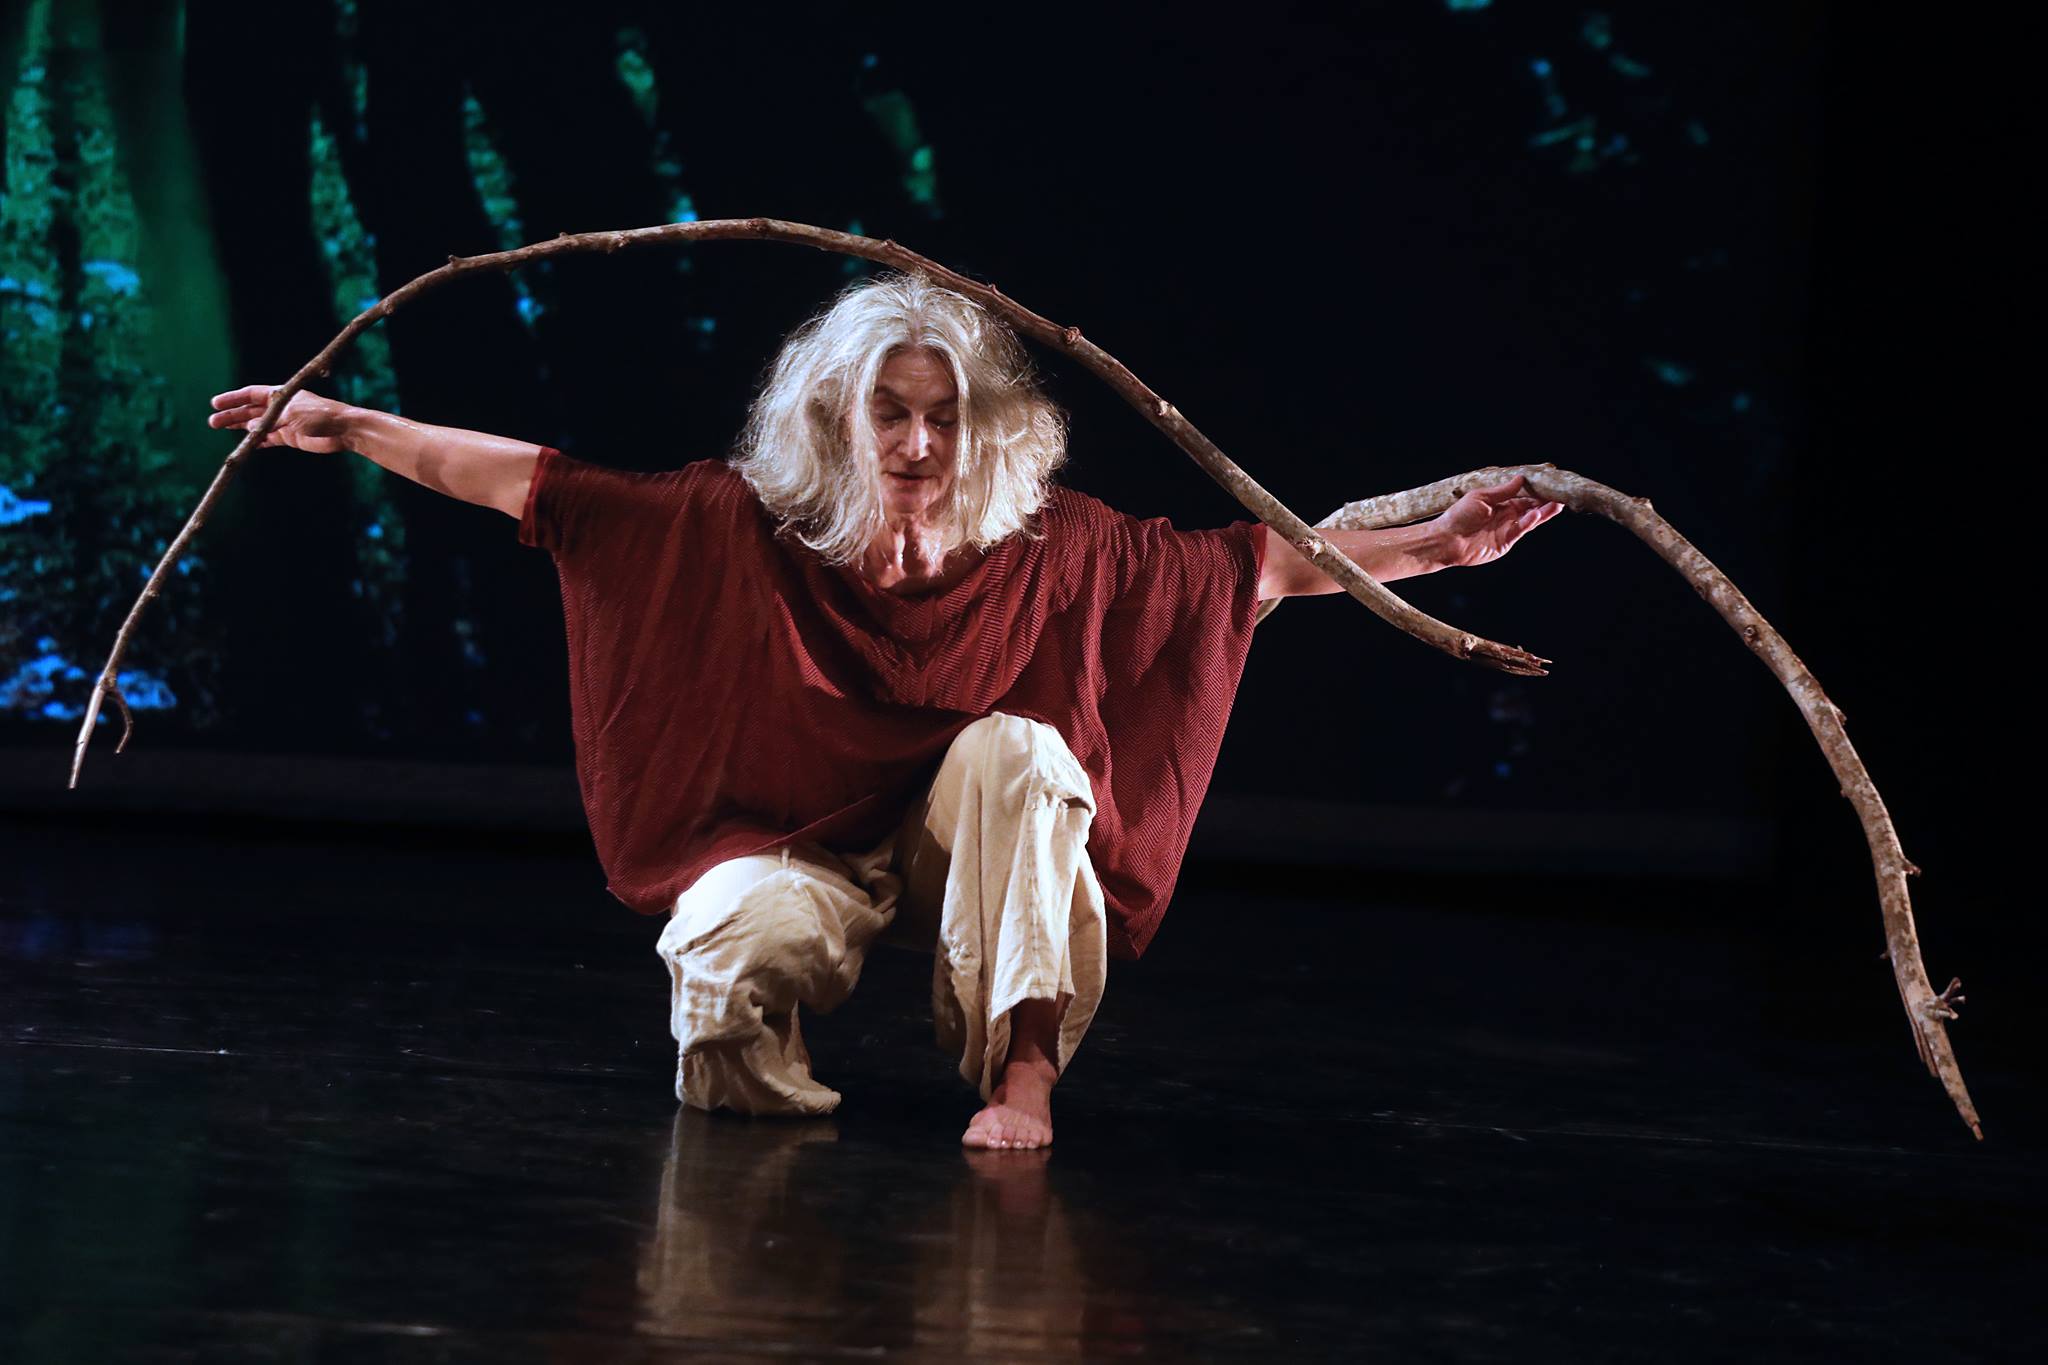 Solo elderly woman dancing on stage